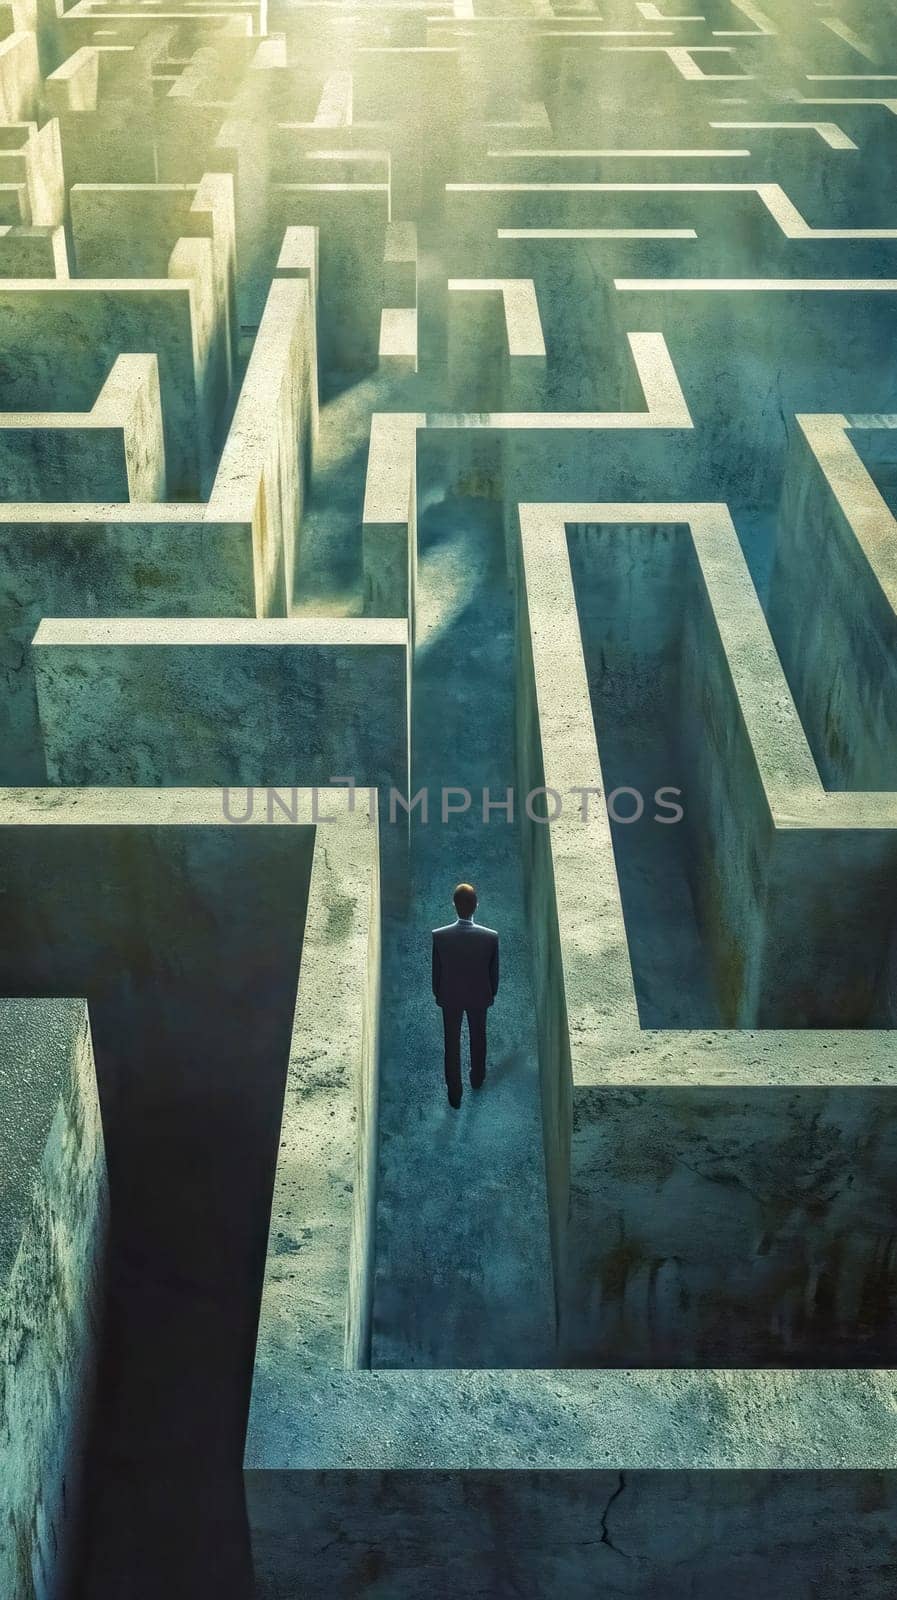 A solitary man in a suit stands at a crossroads within an immense concrete maze, contemplating the path ahead under a bright sky by Edophoto